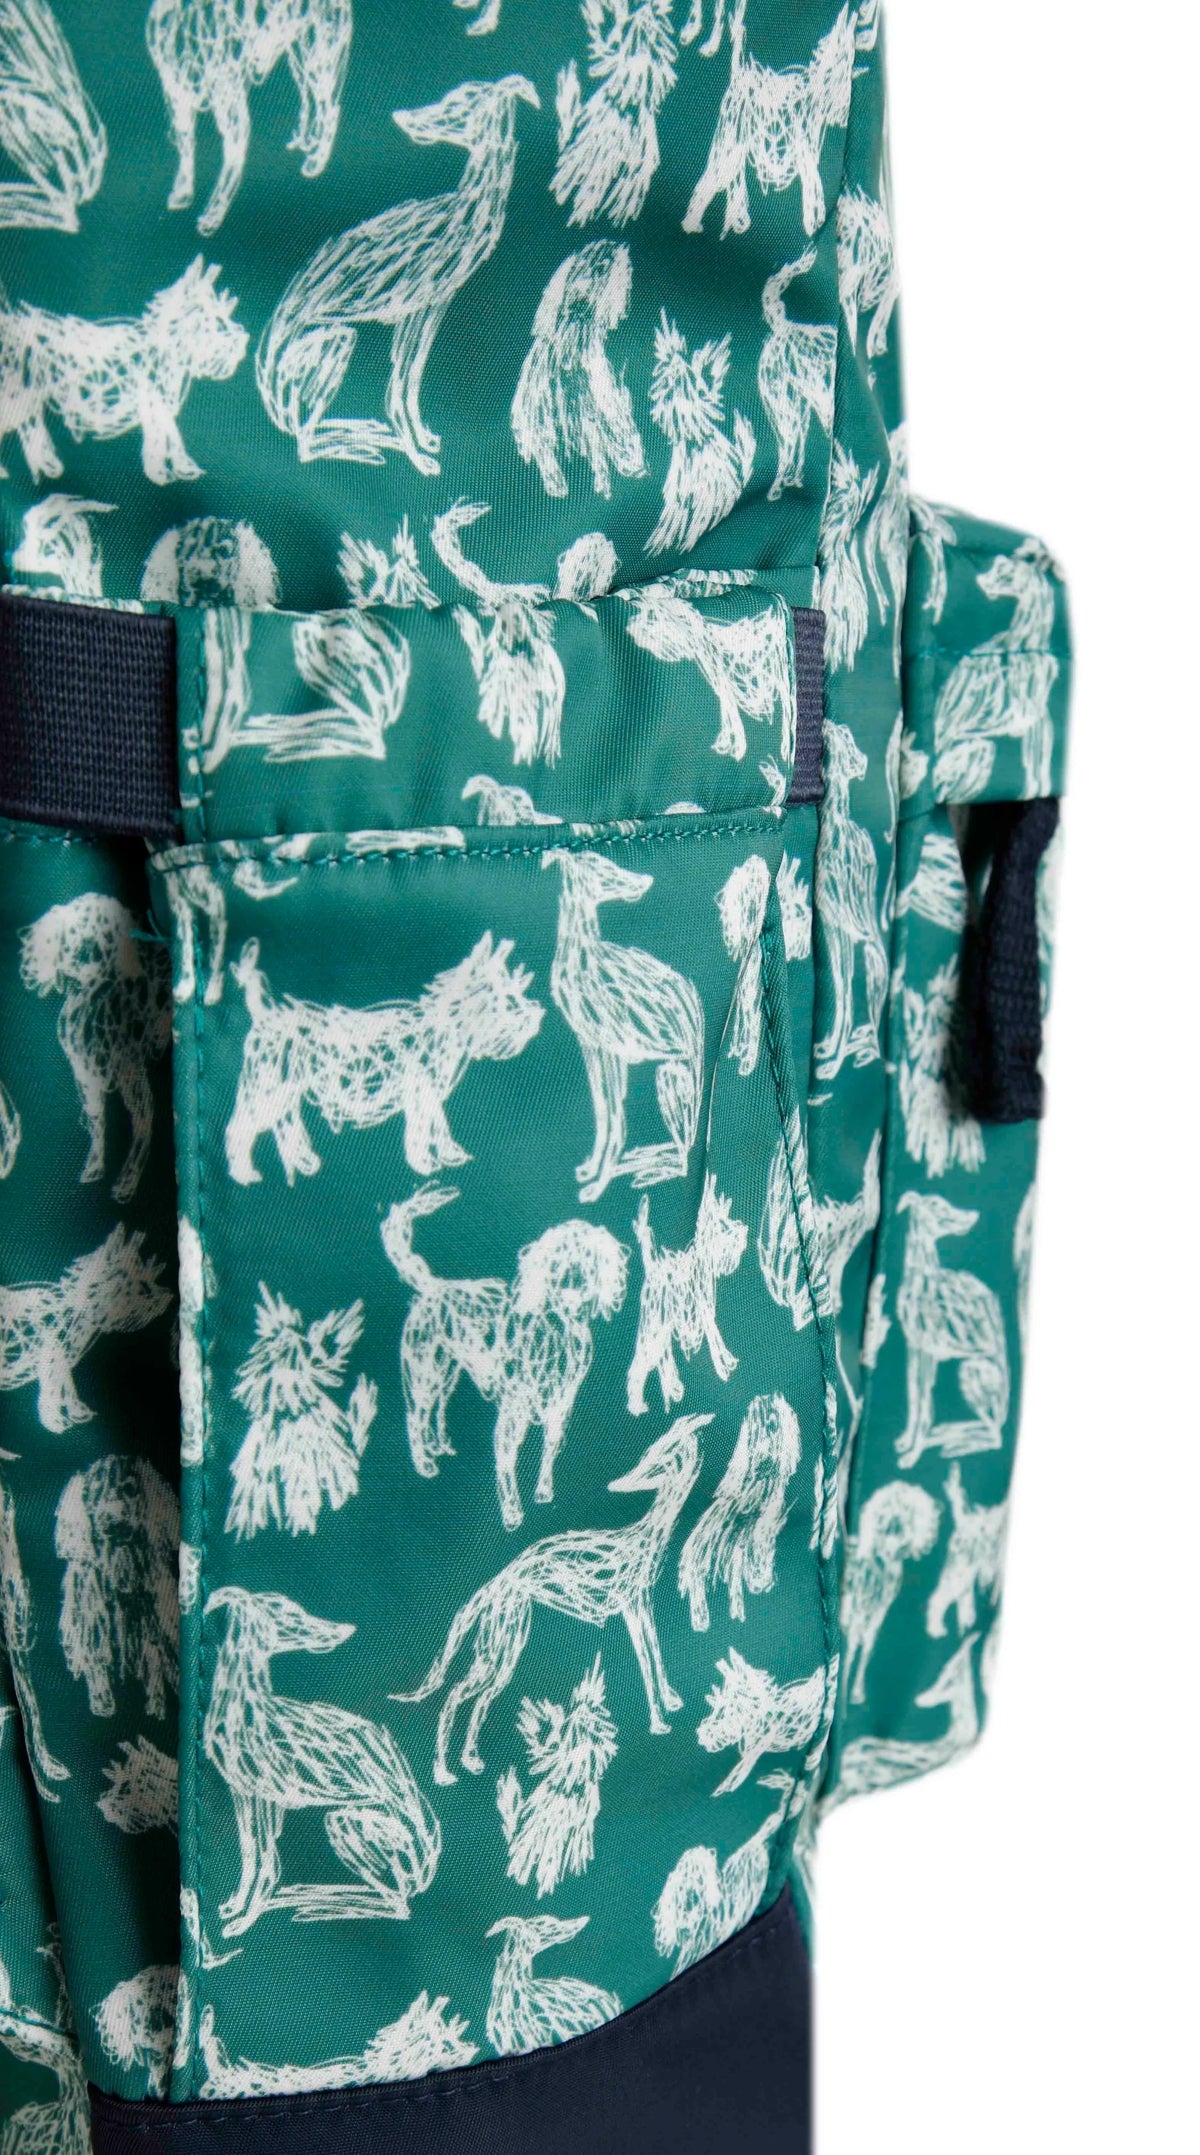 Nahla sketch style dog print backpack bag from Weird Fish in Dark Jade Green with bottle pockets.